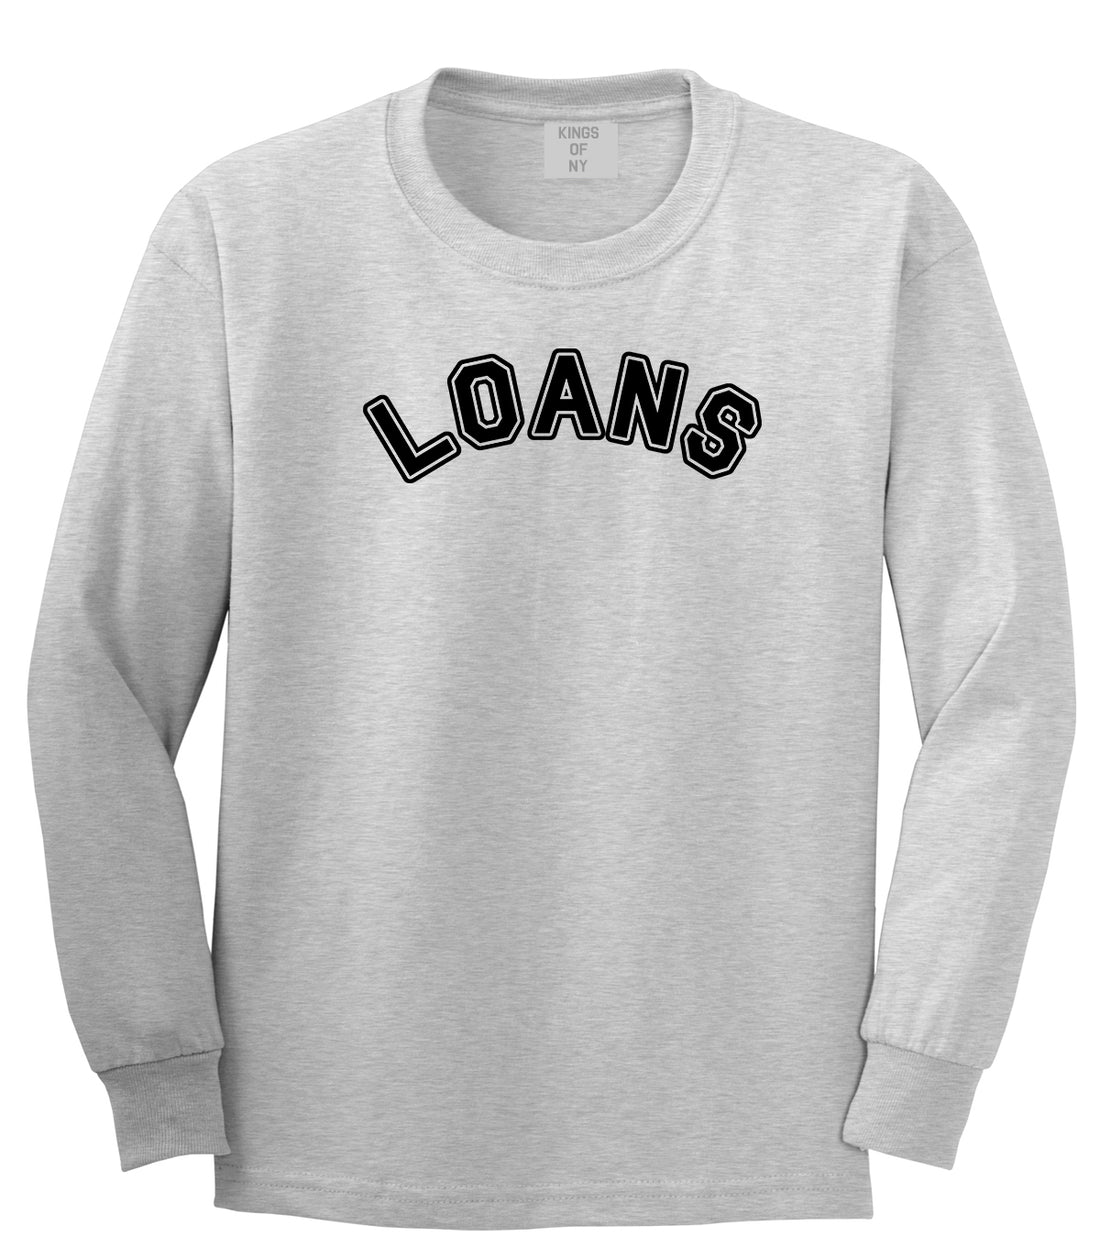 Student Loans College Long Sleeve T-Shirt in Grey